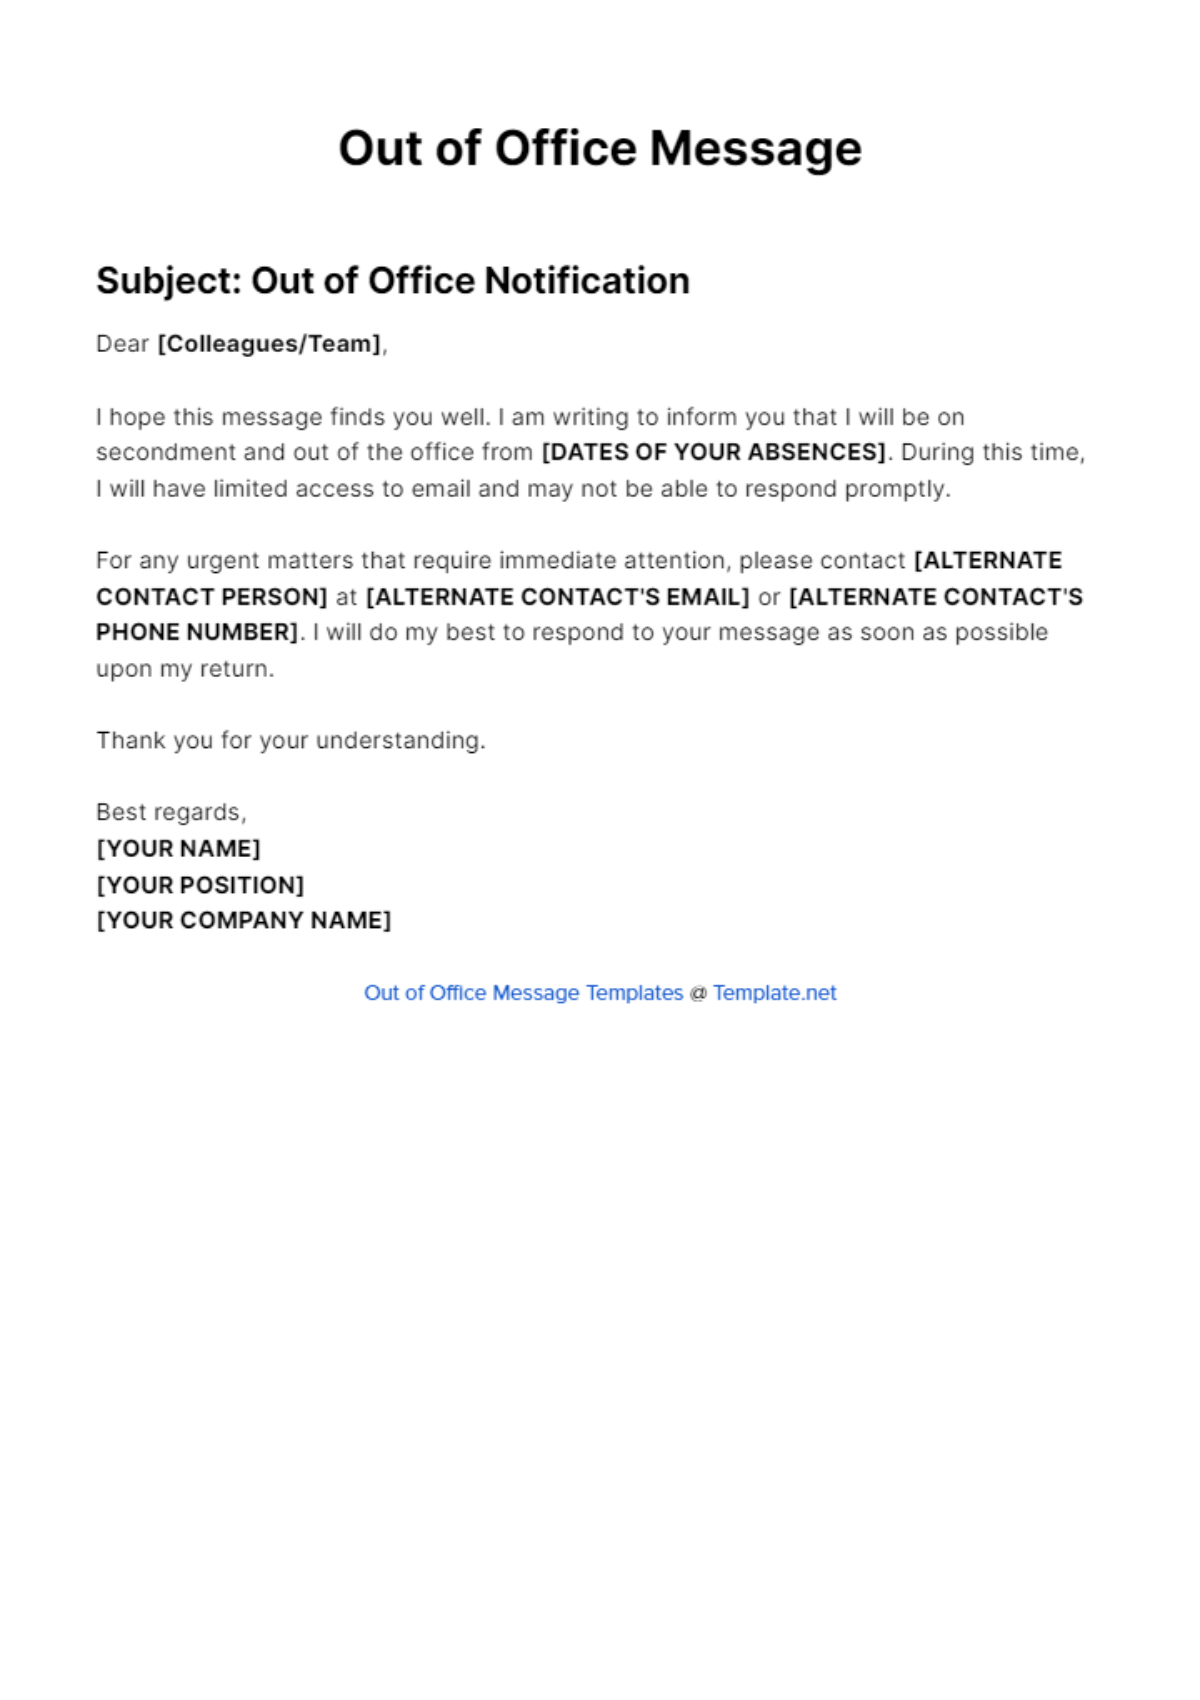 Secondment Out Of Office Message Template